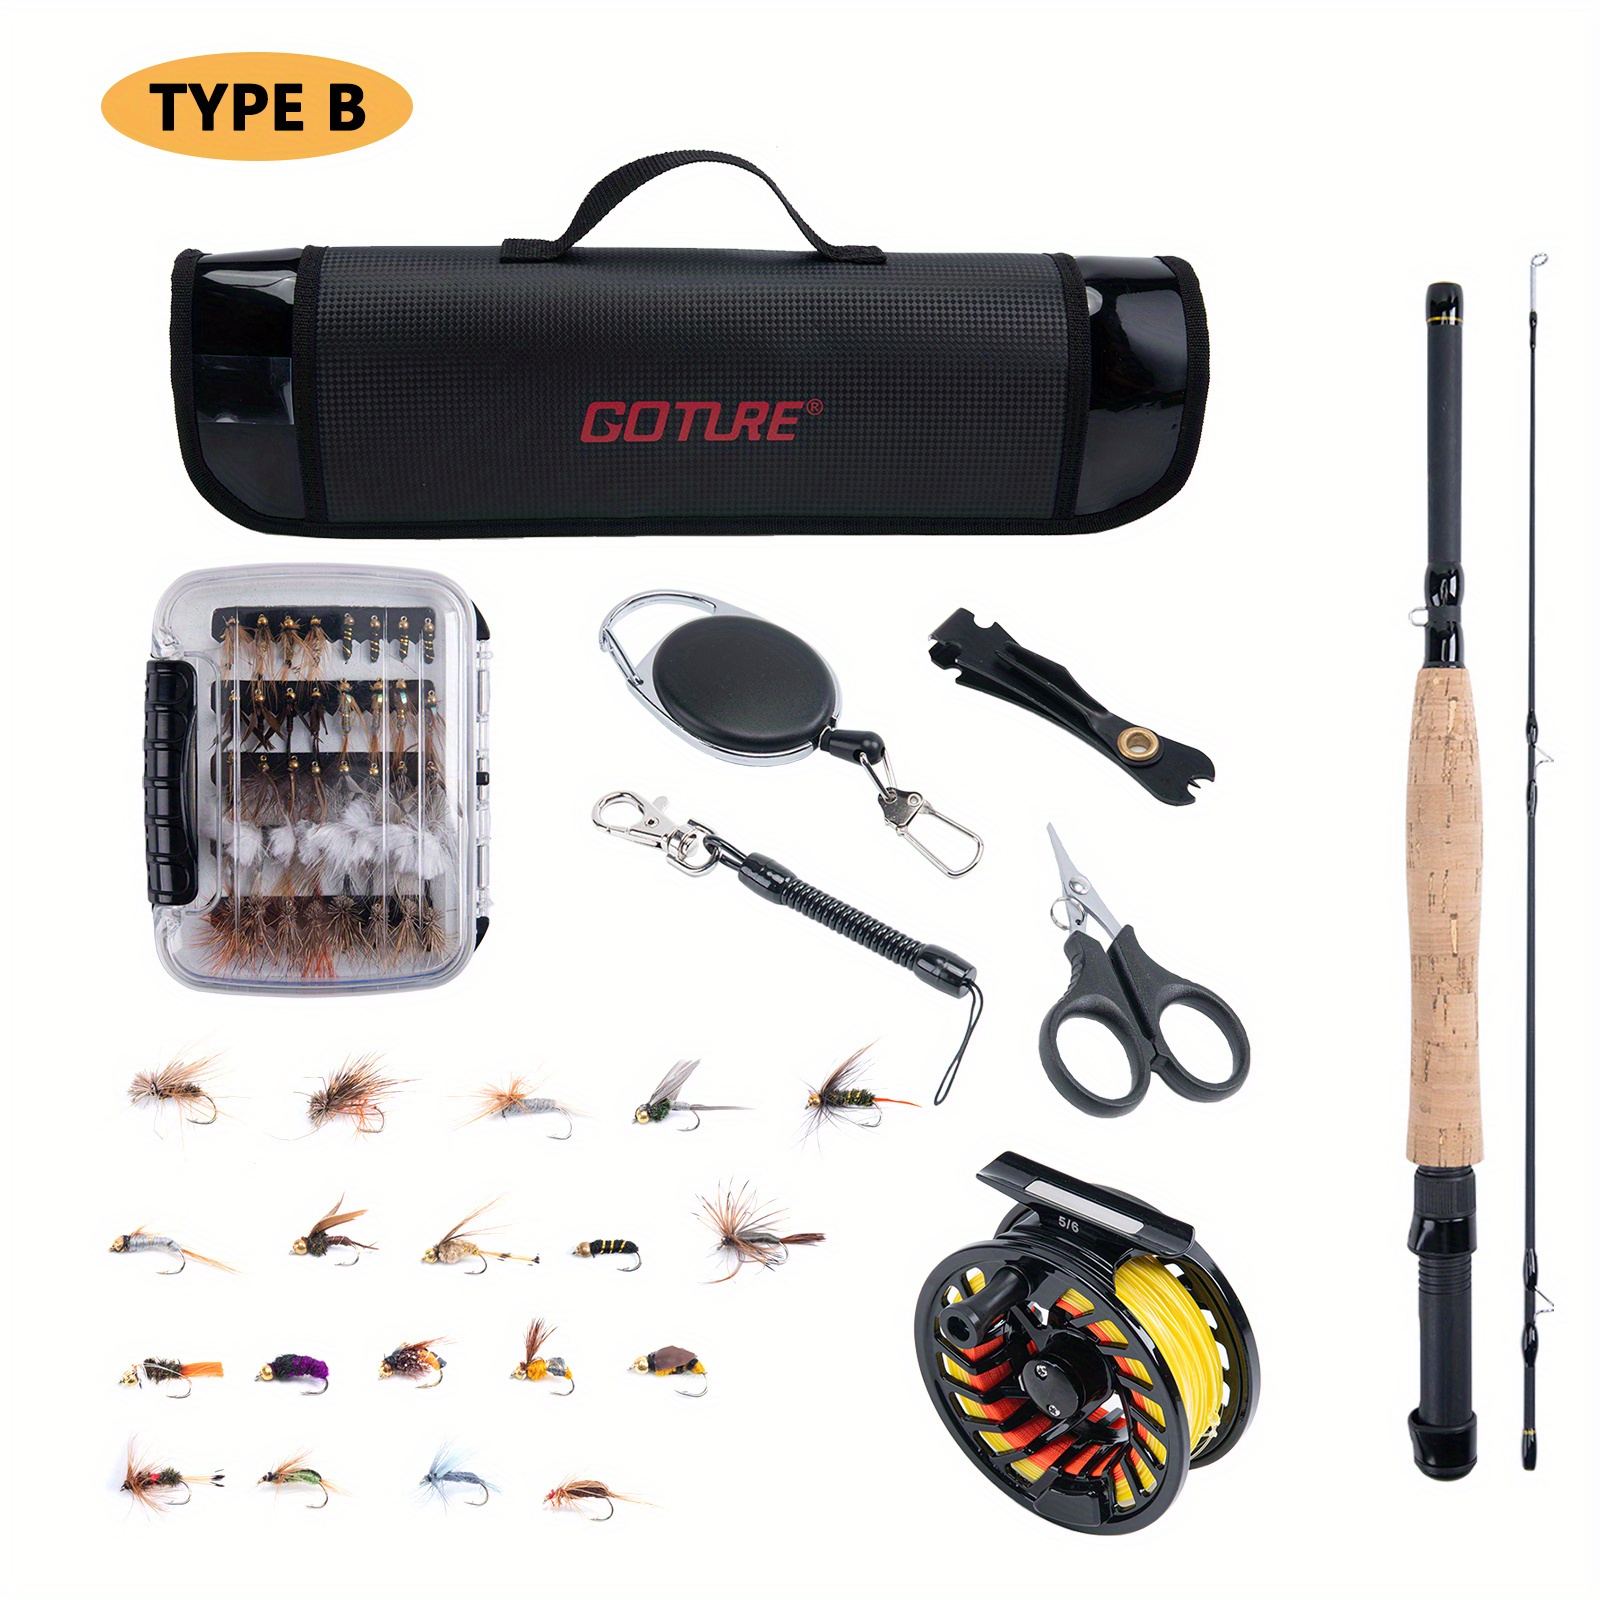 * Fly Fishing Rod And Reel Combo Fly Fishing Starter Package With  Waterproof Fishing Bag 2.7m/9ft Carbon Fly Fishing Rod ABS 5/6 Fly Fishing  Reel